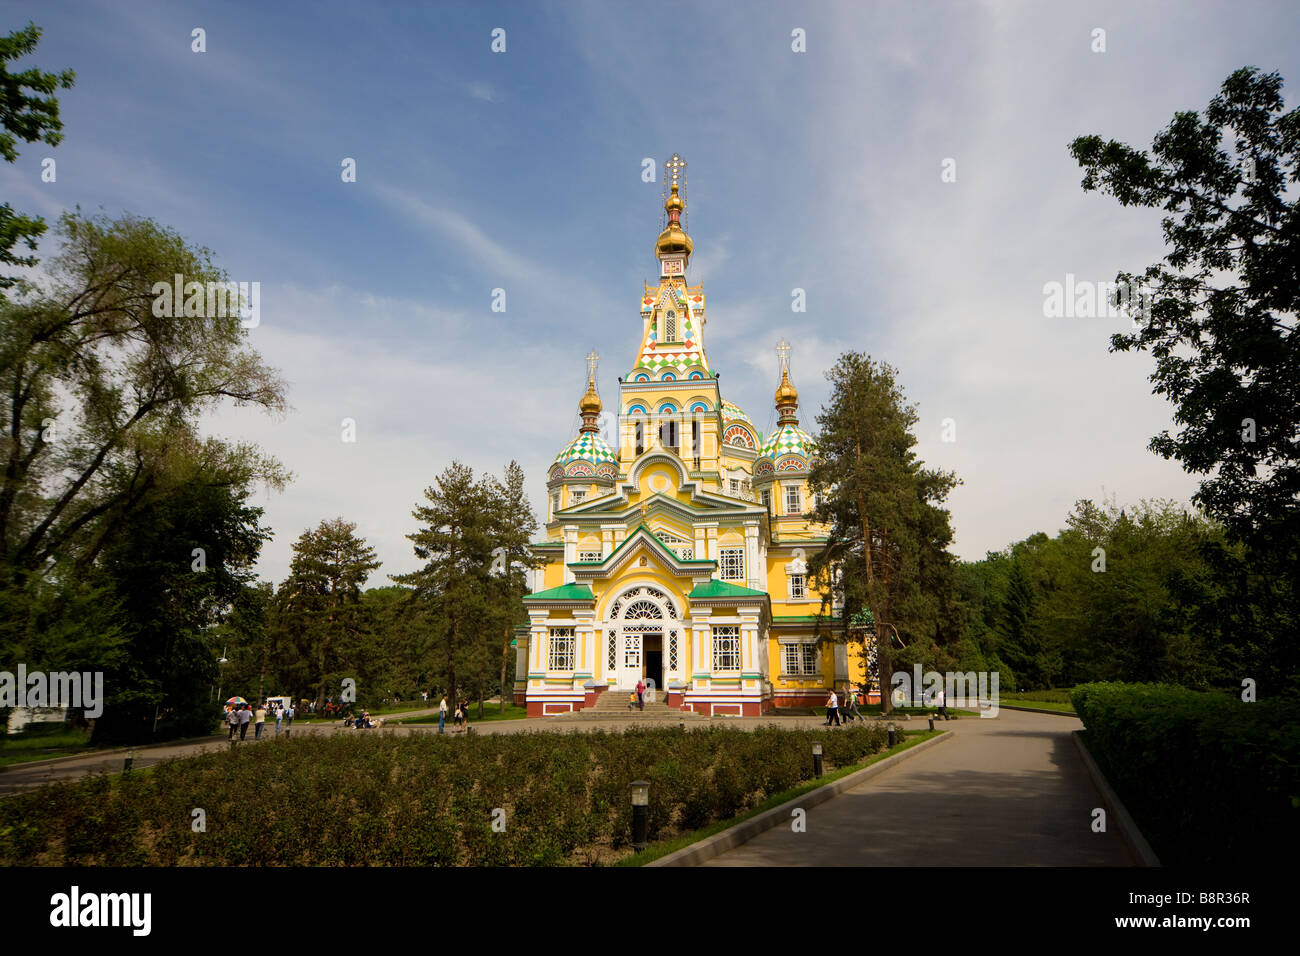 Russian Orthodox Ascension Cathedral or Zenkov Cathedral built of wood without nails in Panfilov Park, Almaty, Kazakhstan. Stock Photo